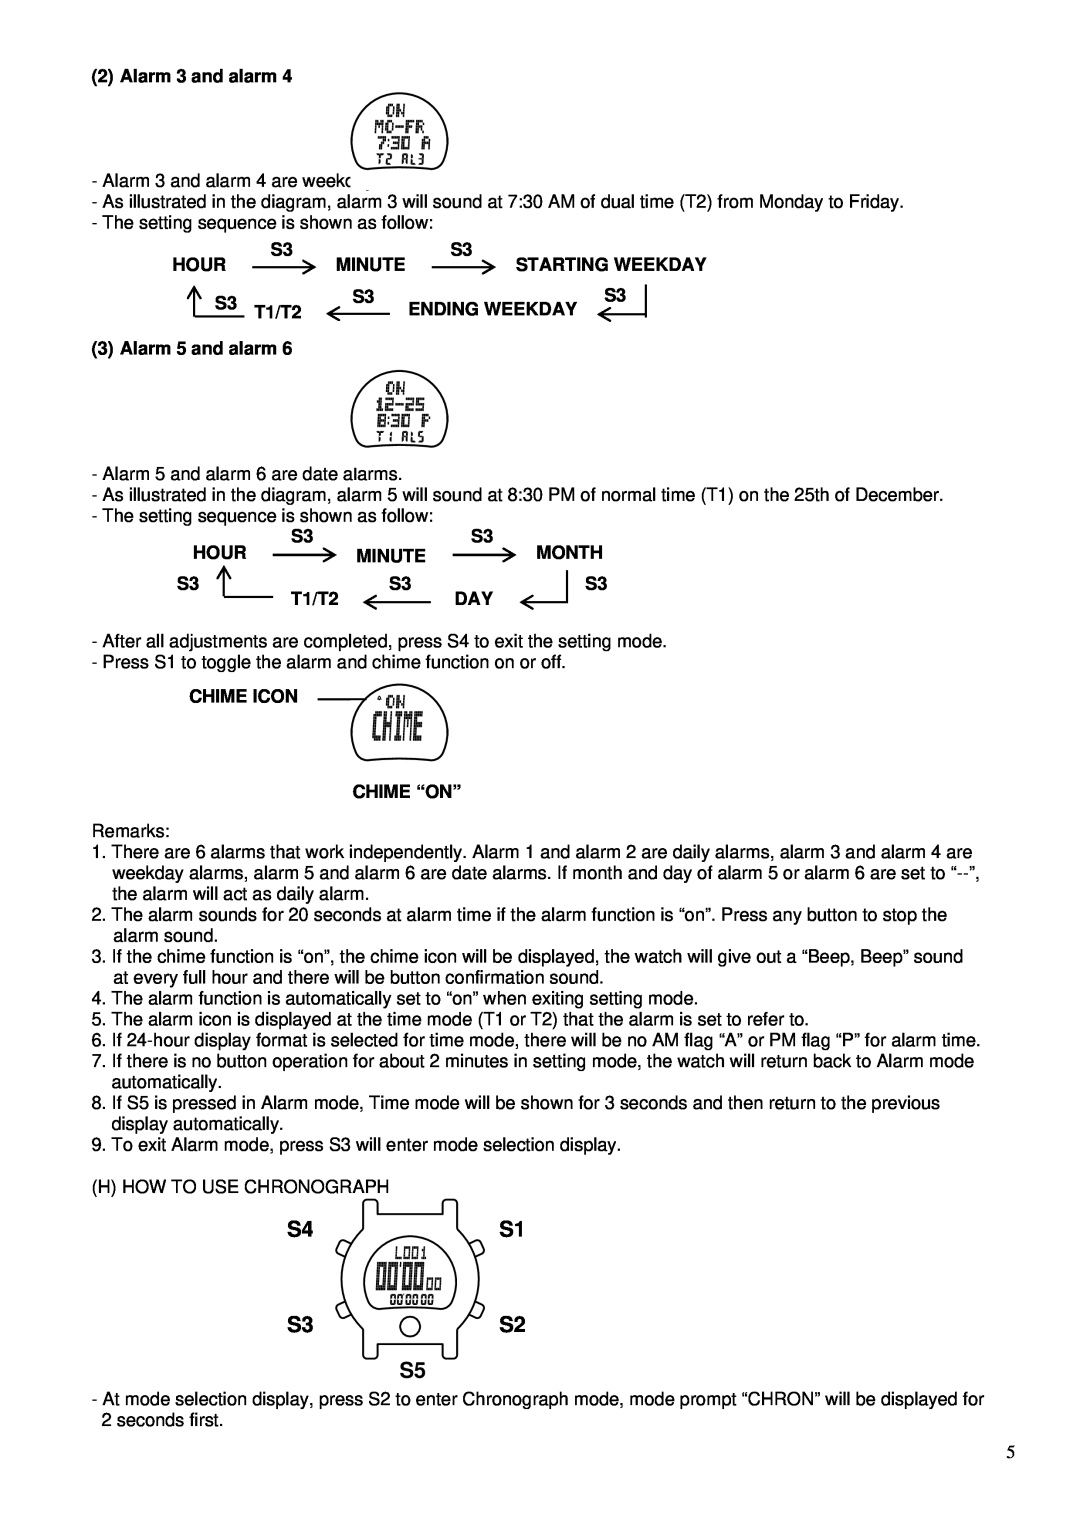 Robic SC-577 operating instructions S4S1 S3S2 S5, Alarm 3 and alarm 